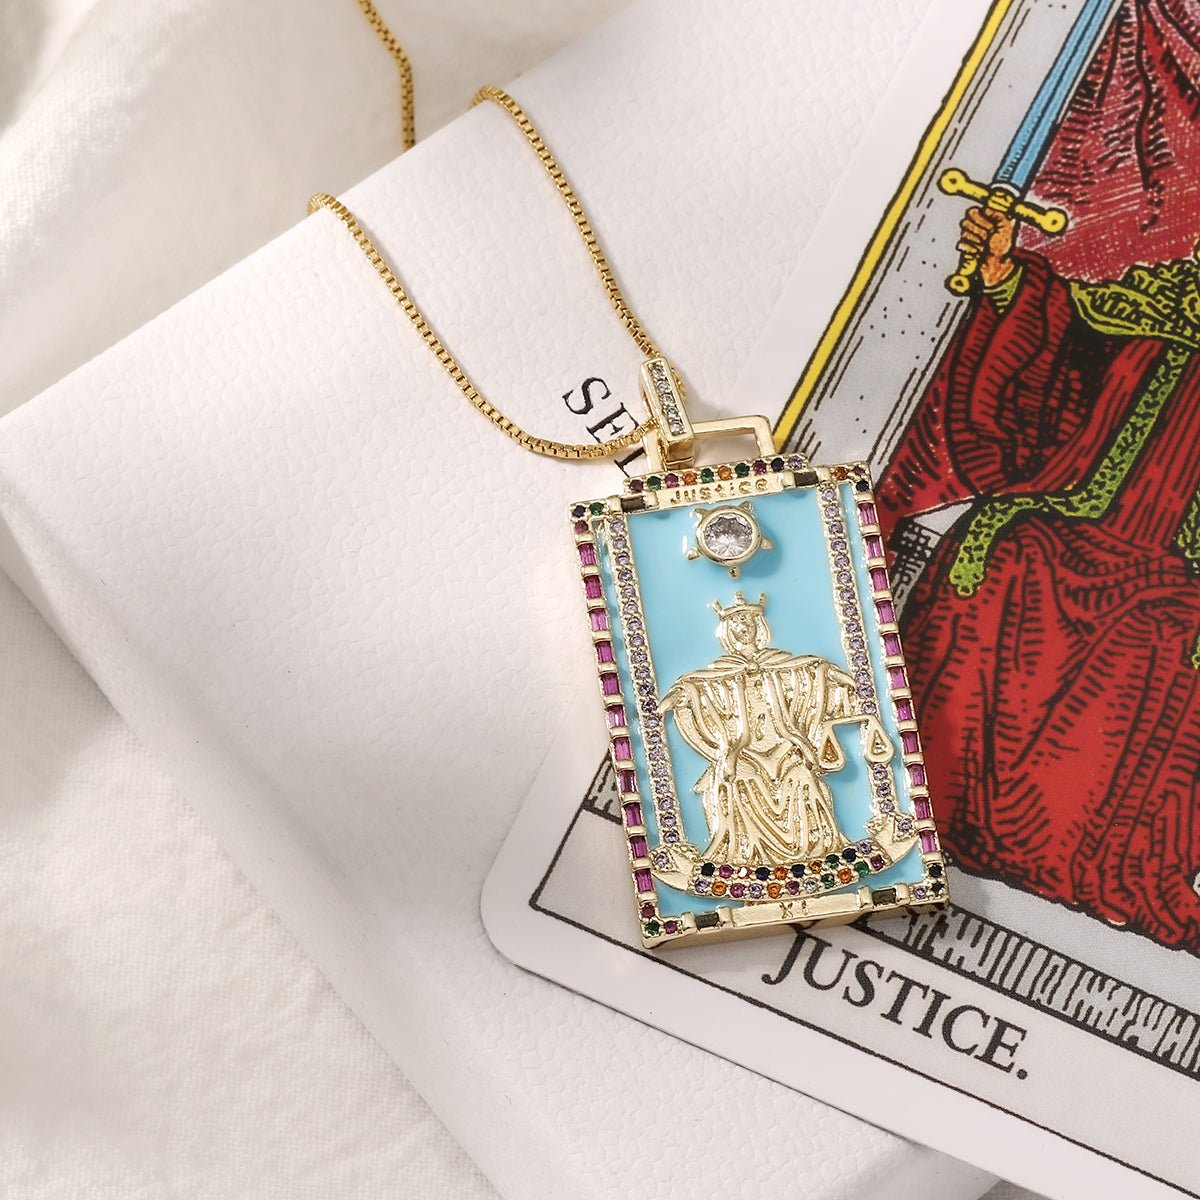 The World Tarot Card Necklaces